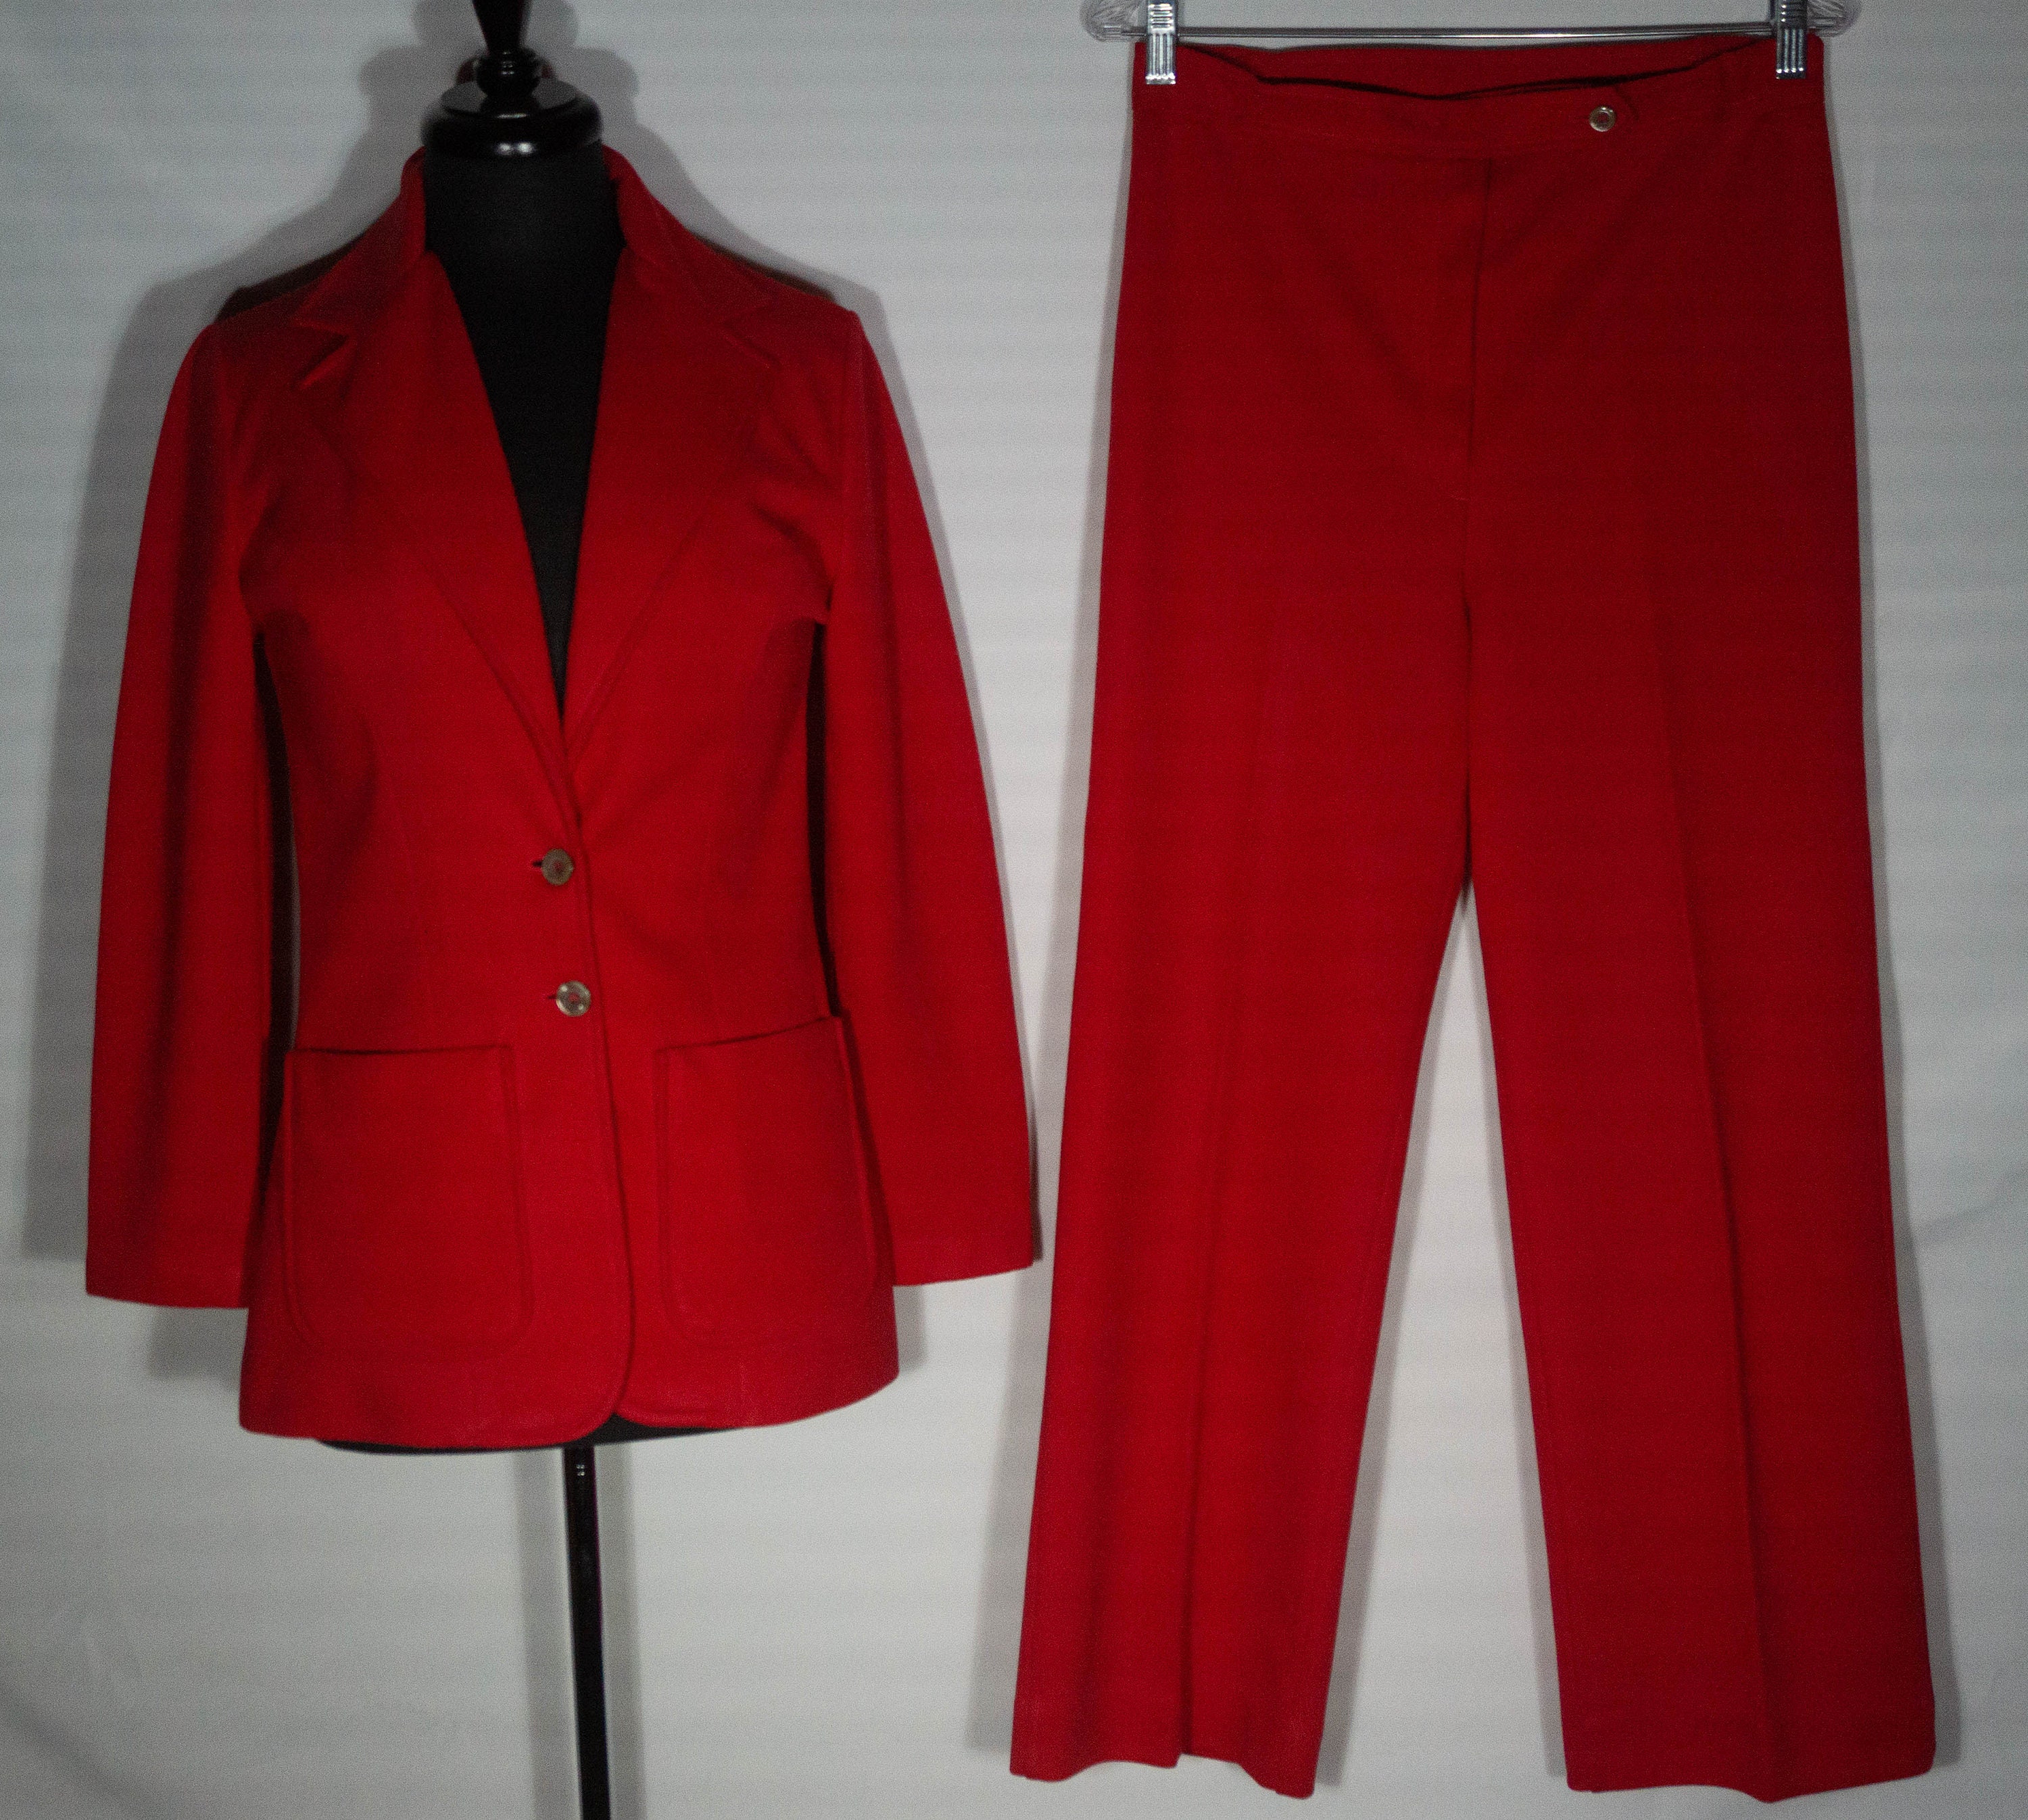 Blue suit for women, jacket and tight pants suit, tapered trousers with  blazer, Gilda Suit -  Portugal